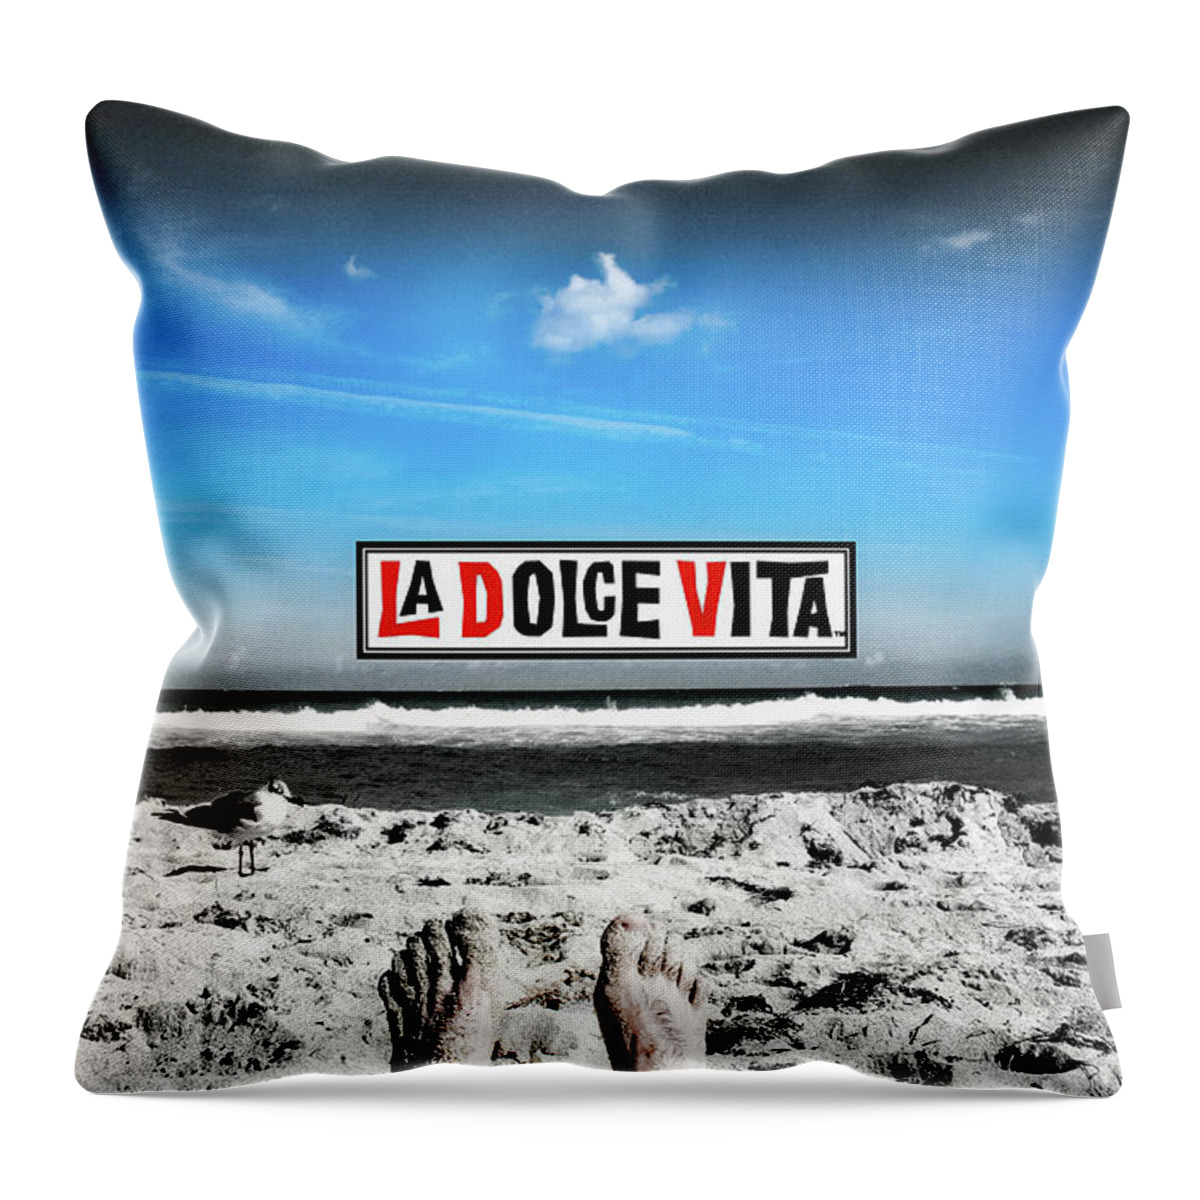 La Dolce Vita Throw Pillow featuring the photograph La Dolce Vita Style by La Dolce Vita